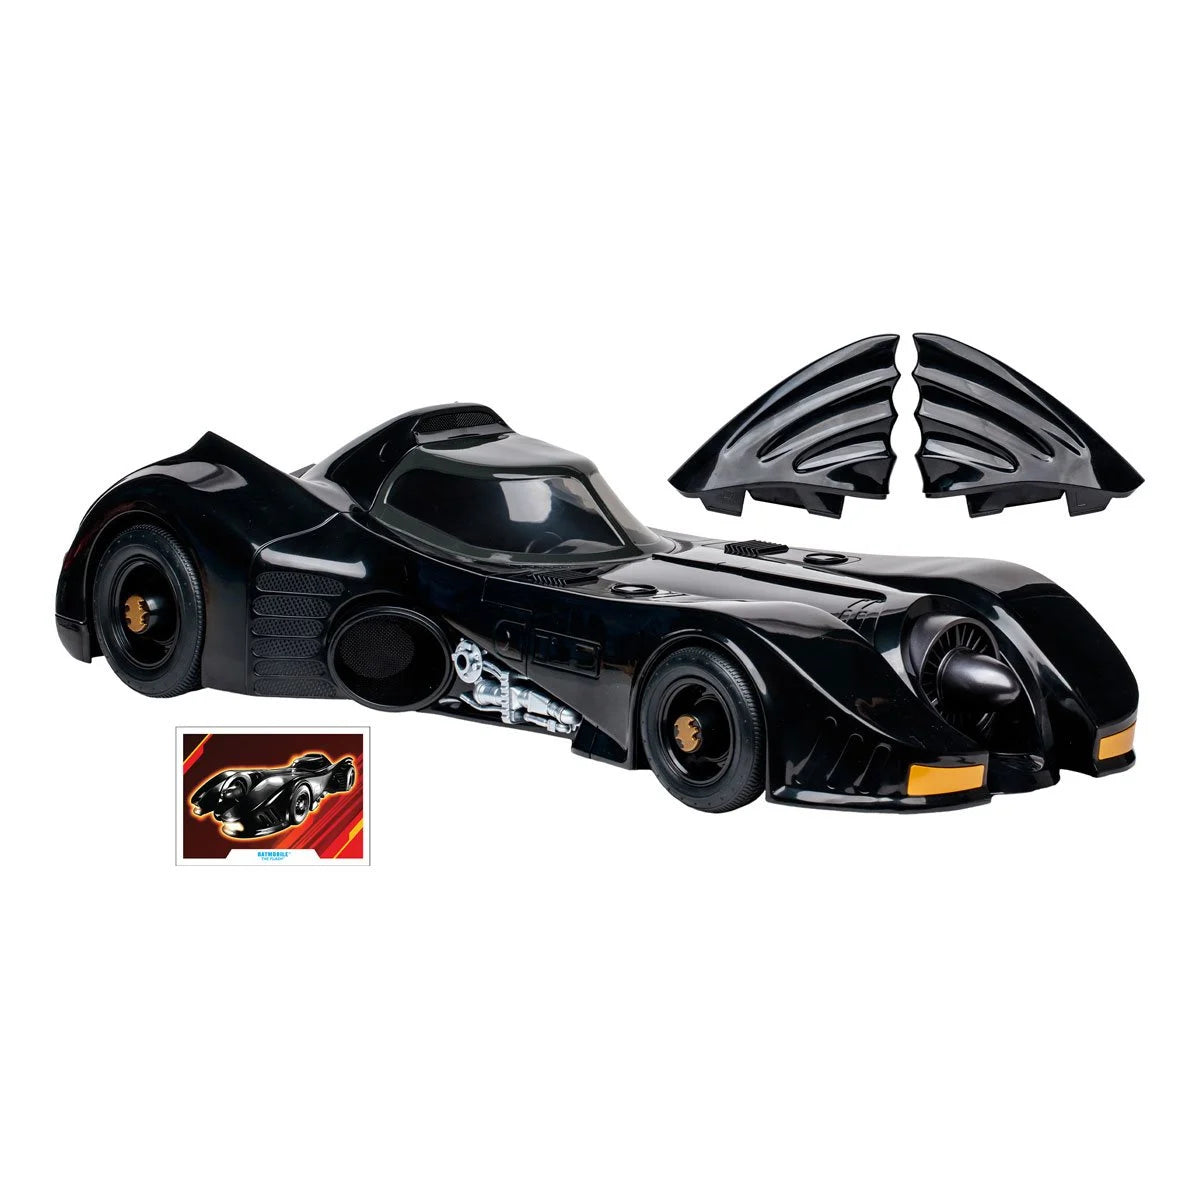 DC The Flash Movie Batmobile 1:7 Scale Vehicle with accessories